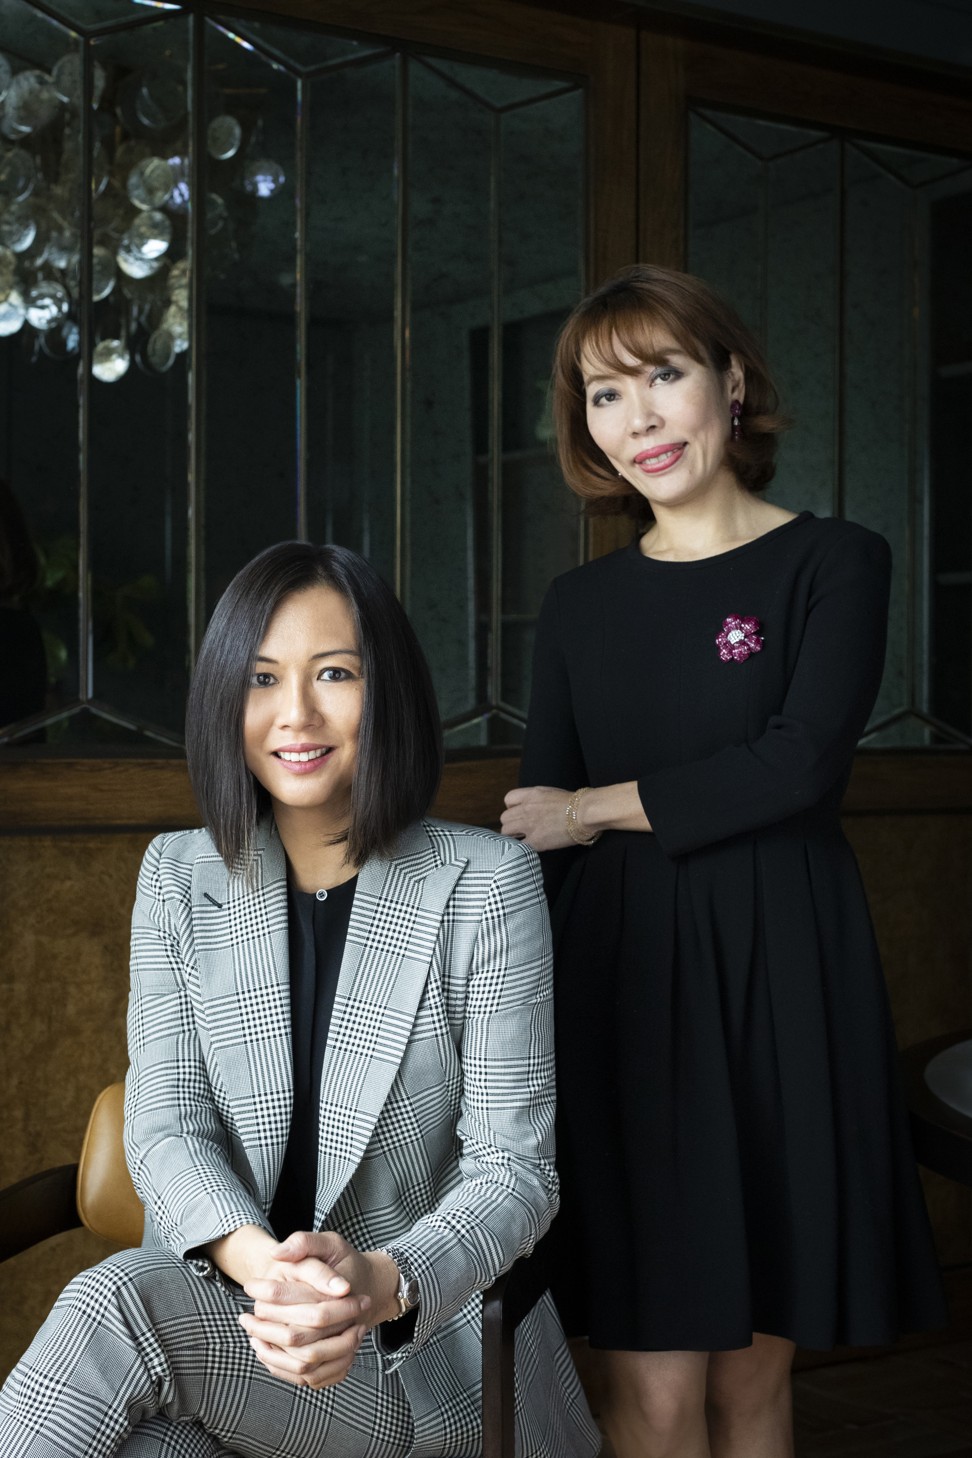 Apex Property co-founders Sylvia Tang (left) and Vicky Lam say being women did not put them at a disadvantage in the highly-competitive luxury property development. Photo: Handout